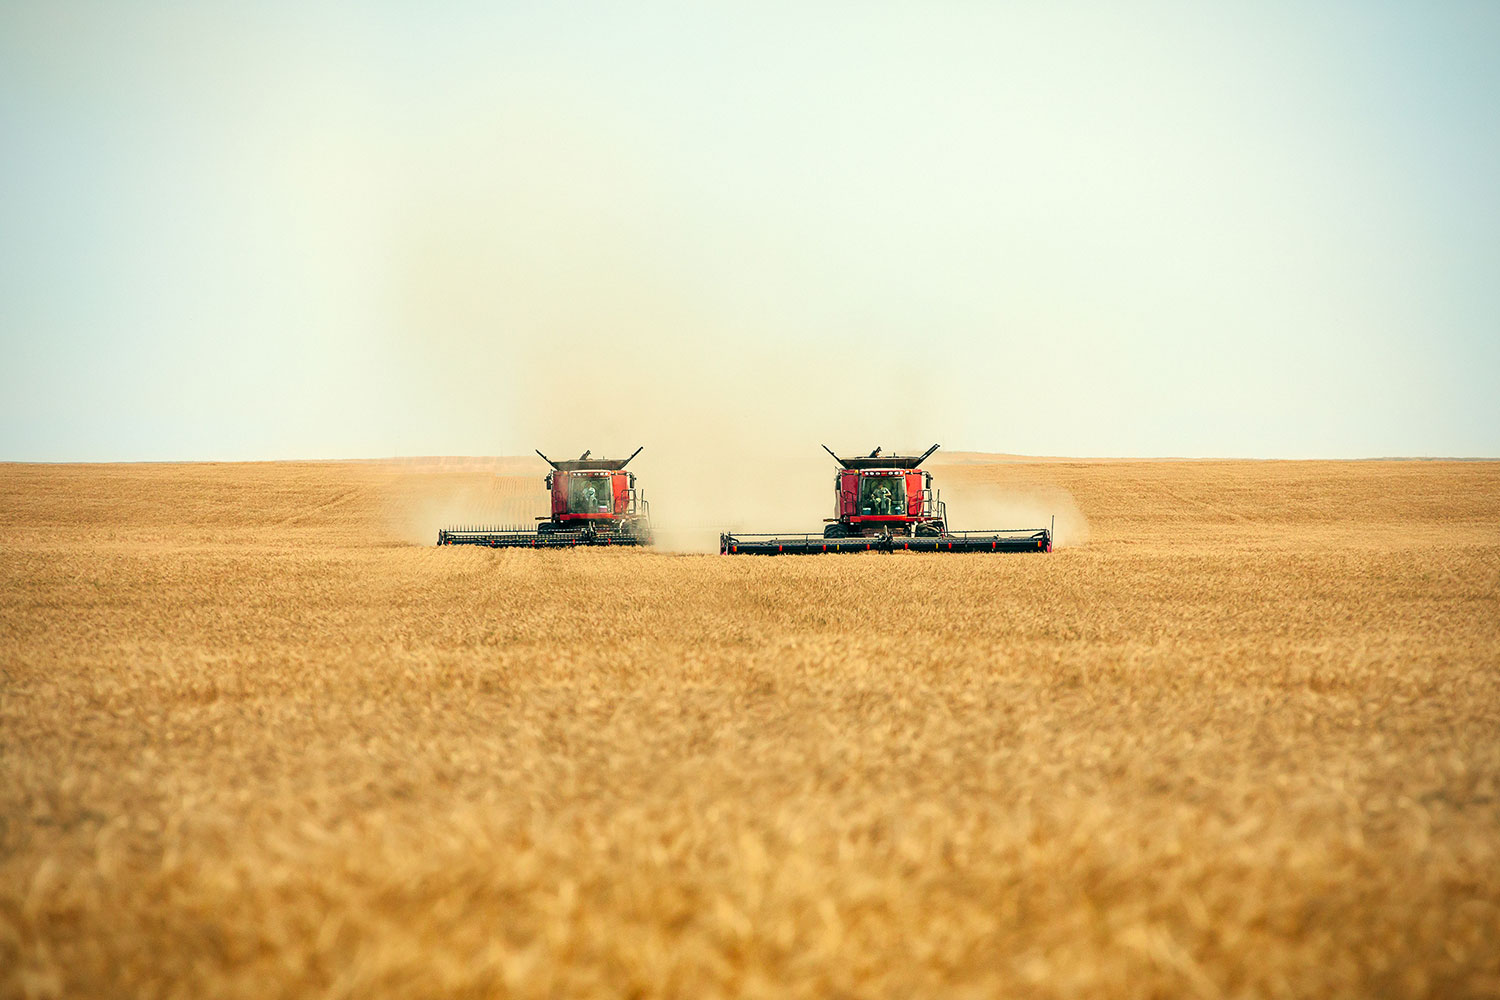 A pair of combines cutting a swath right down the middle of a wheat field north of Havre, Montana.&nbsp;→ Buy a Print&nbsp;or License Photo